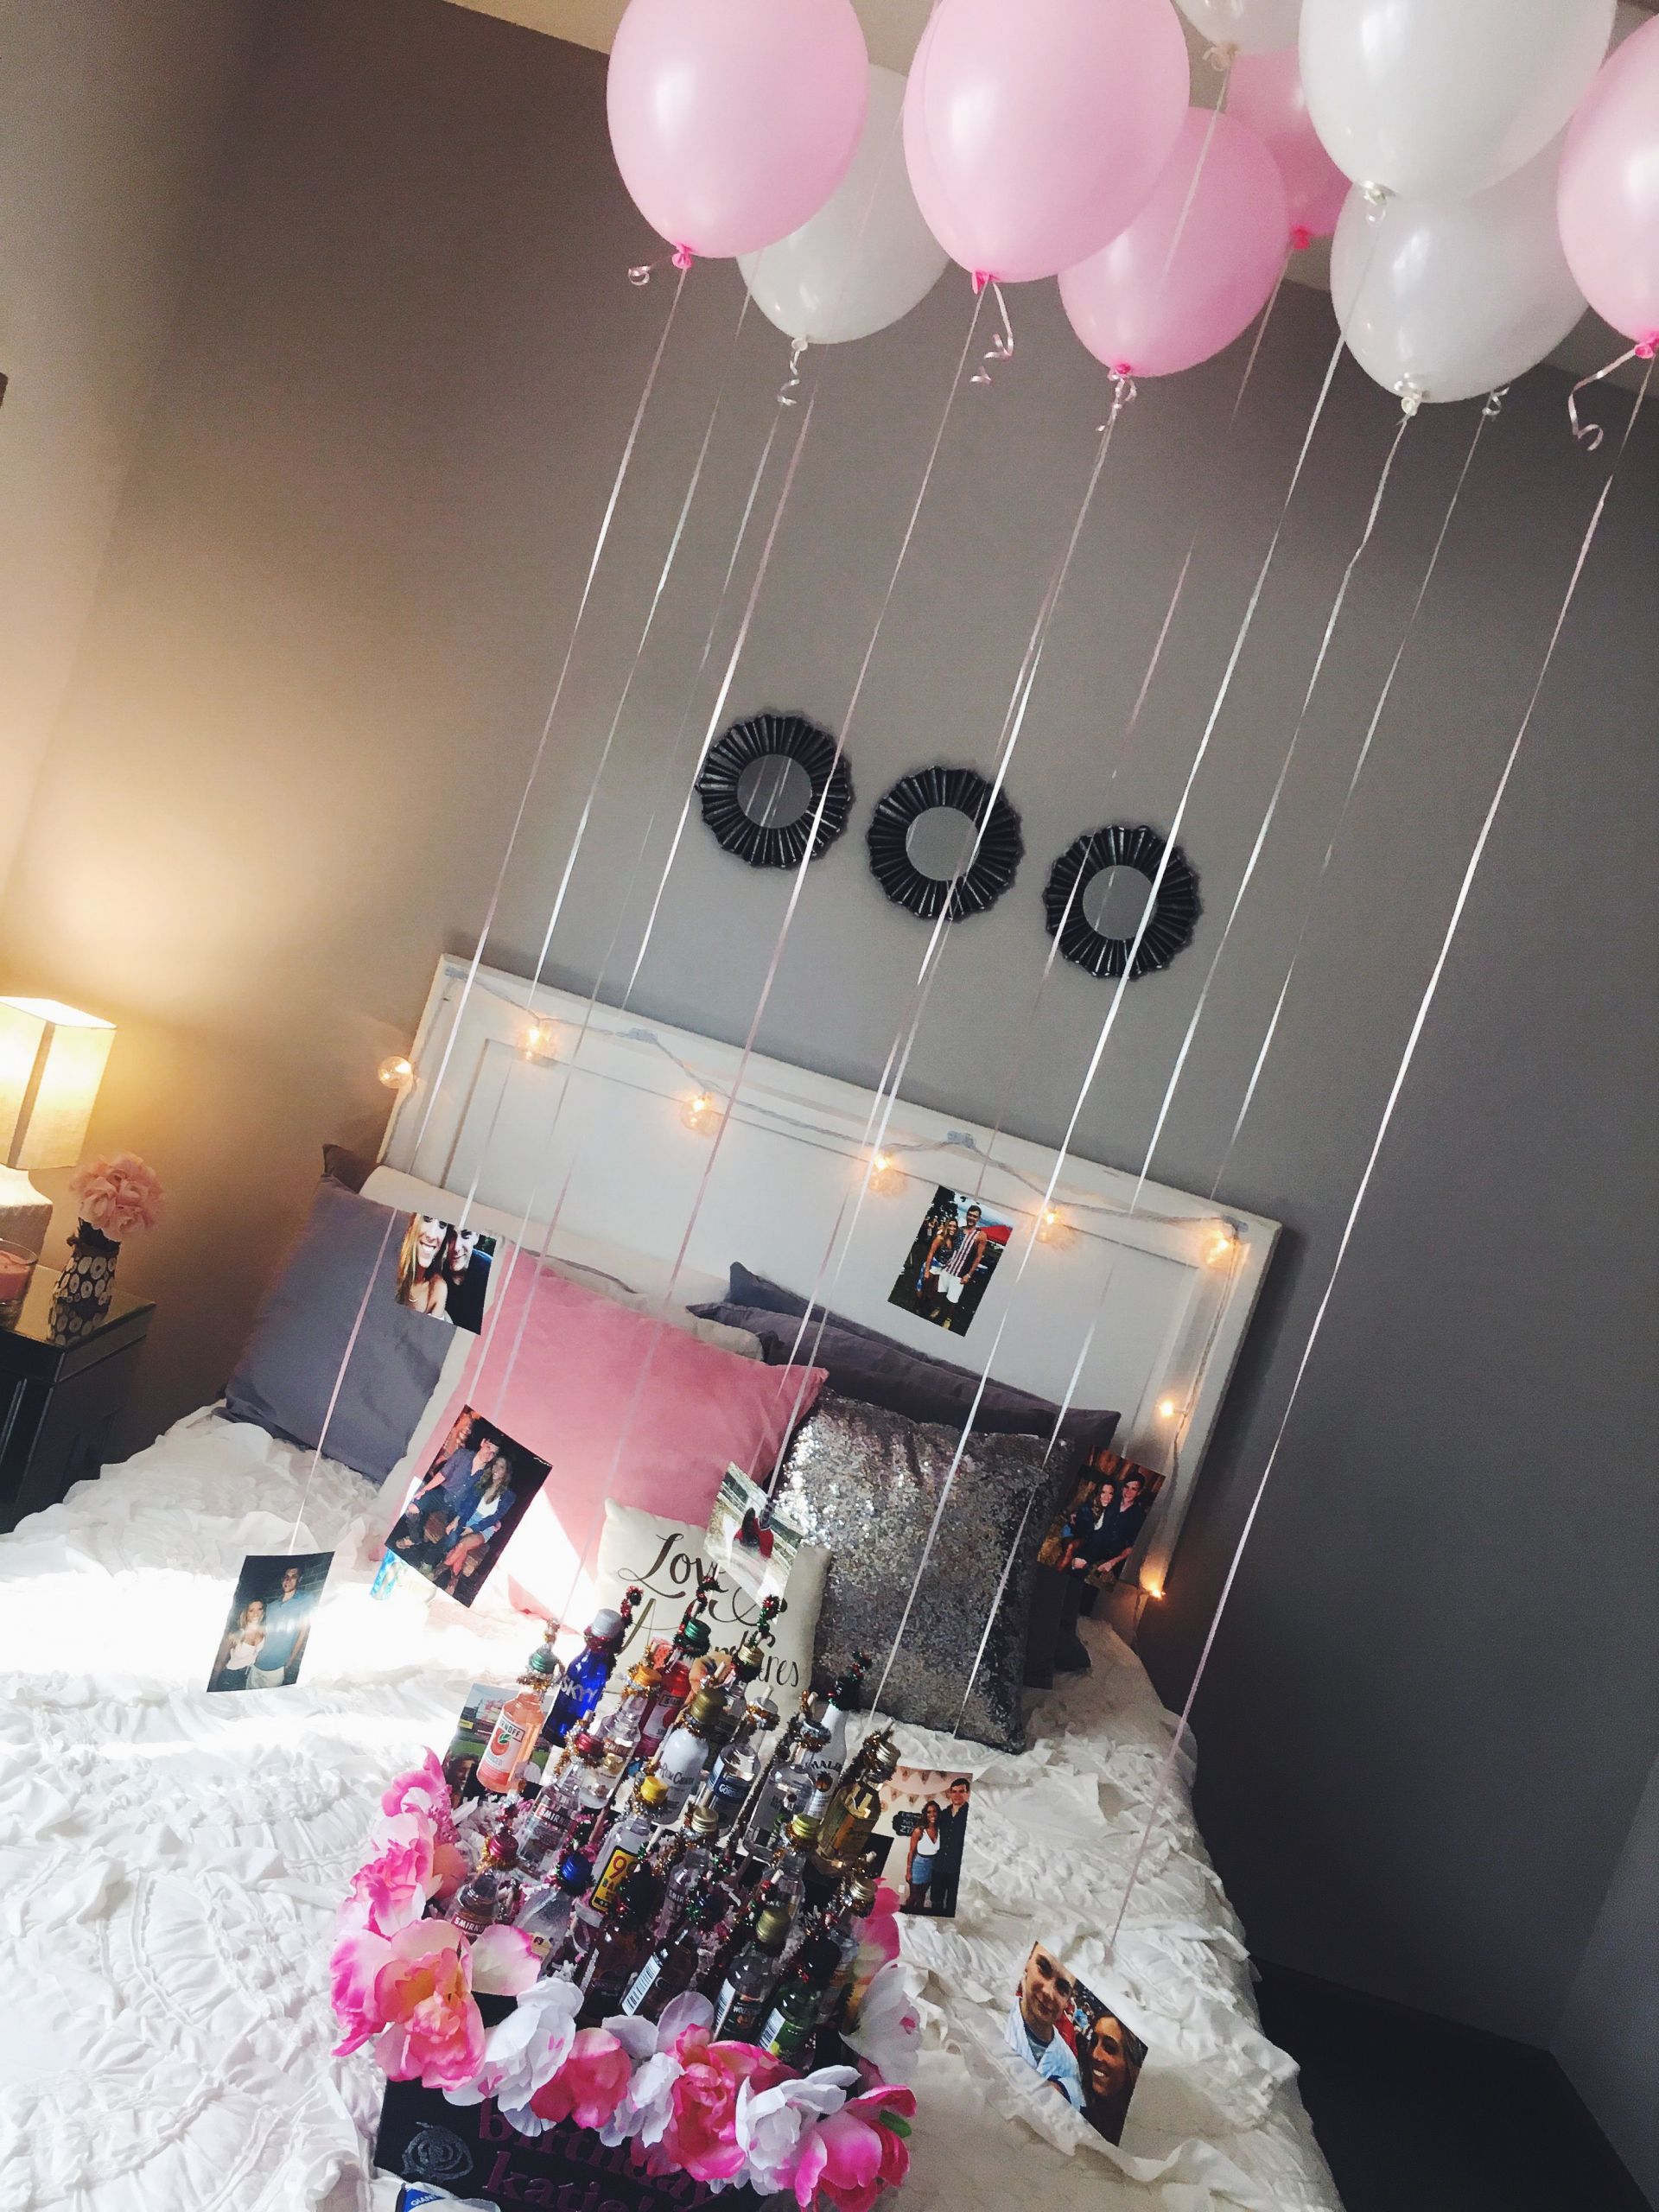 21St Birthday Gift Ideas For Girlfriend
 easy and cute decorations for a friend or girlfriends 21st